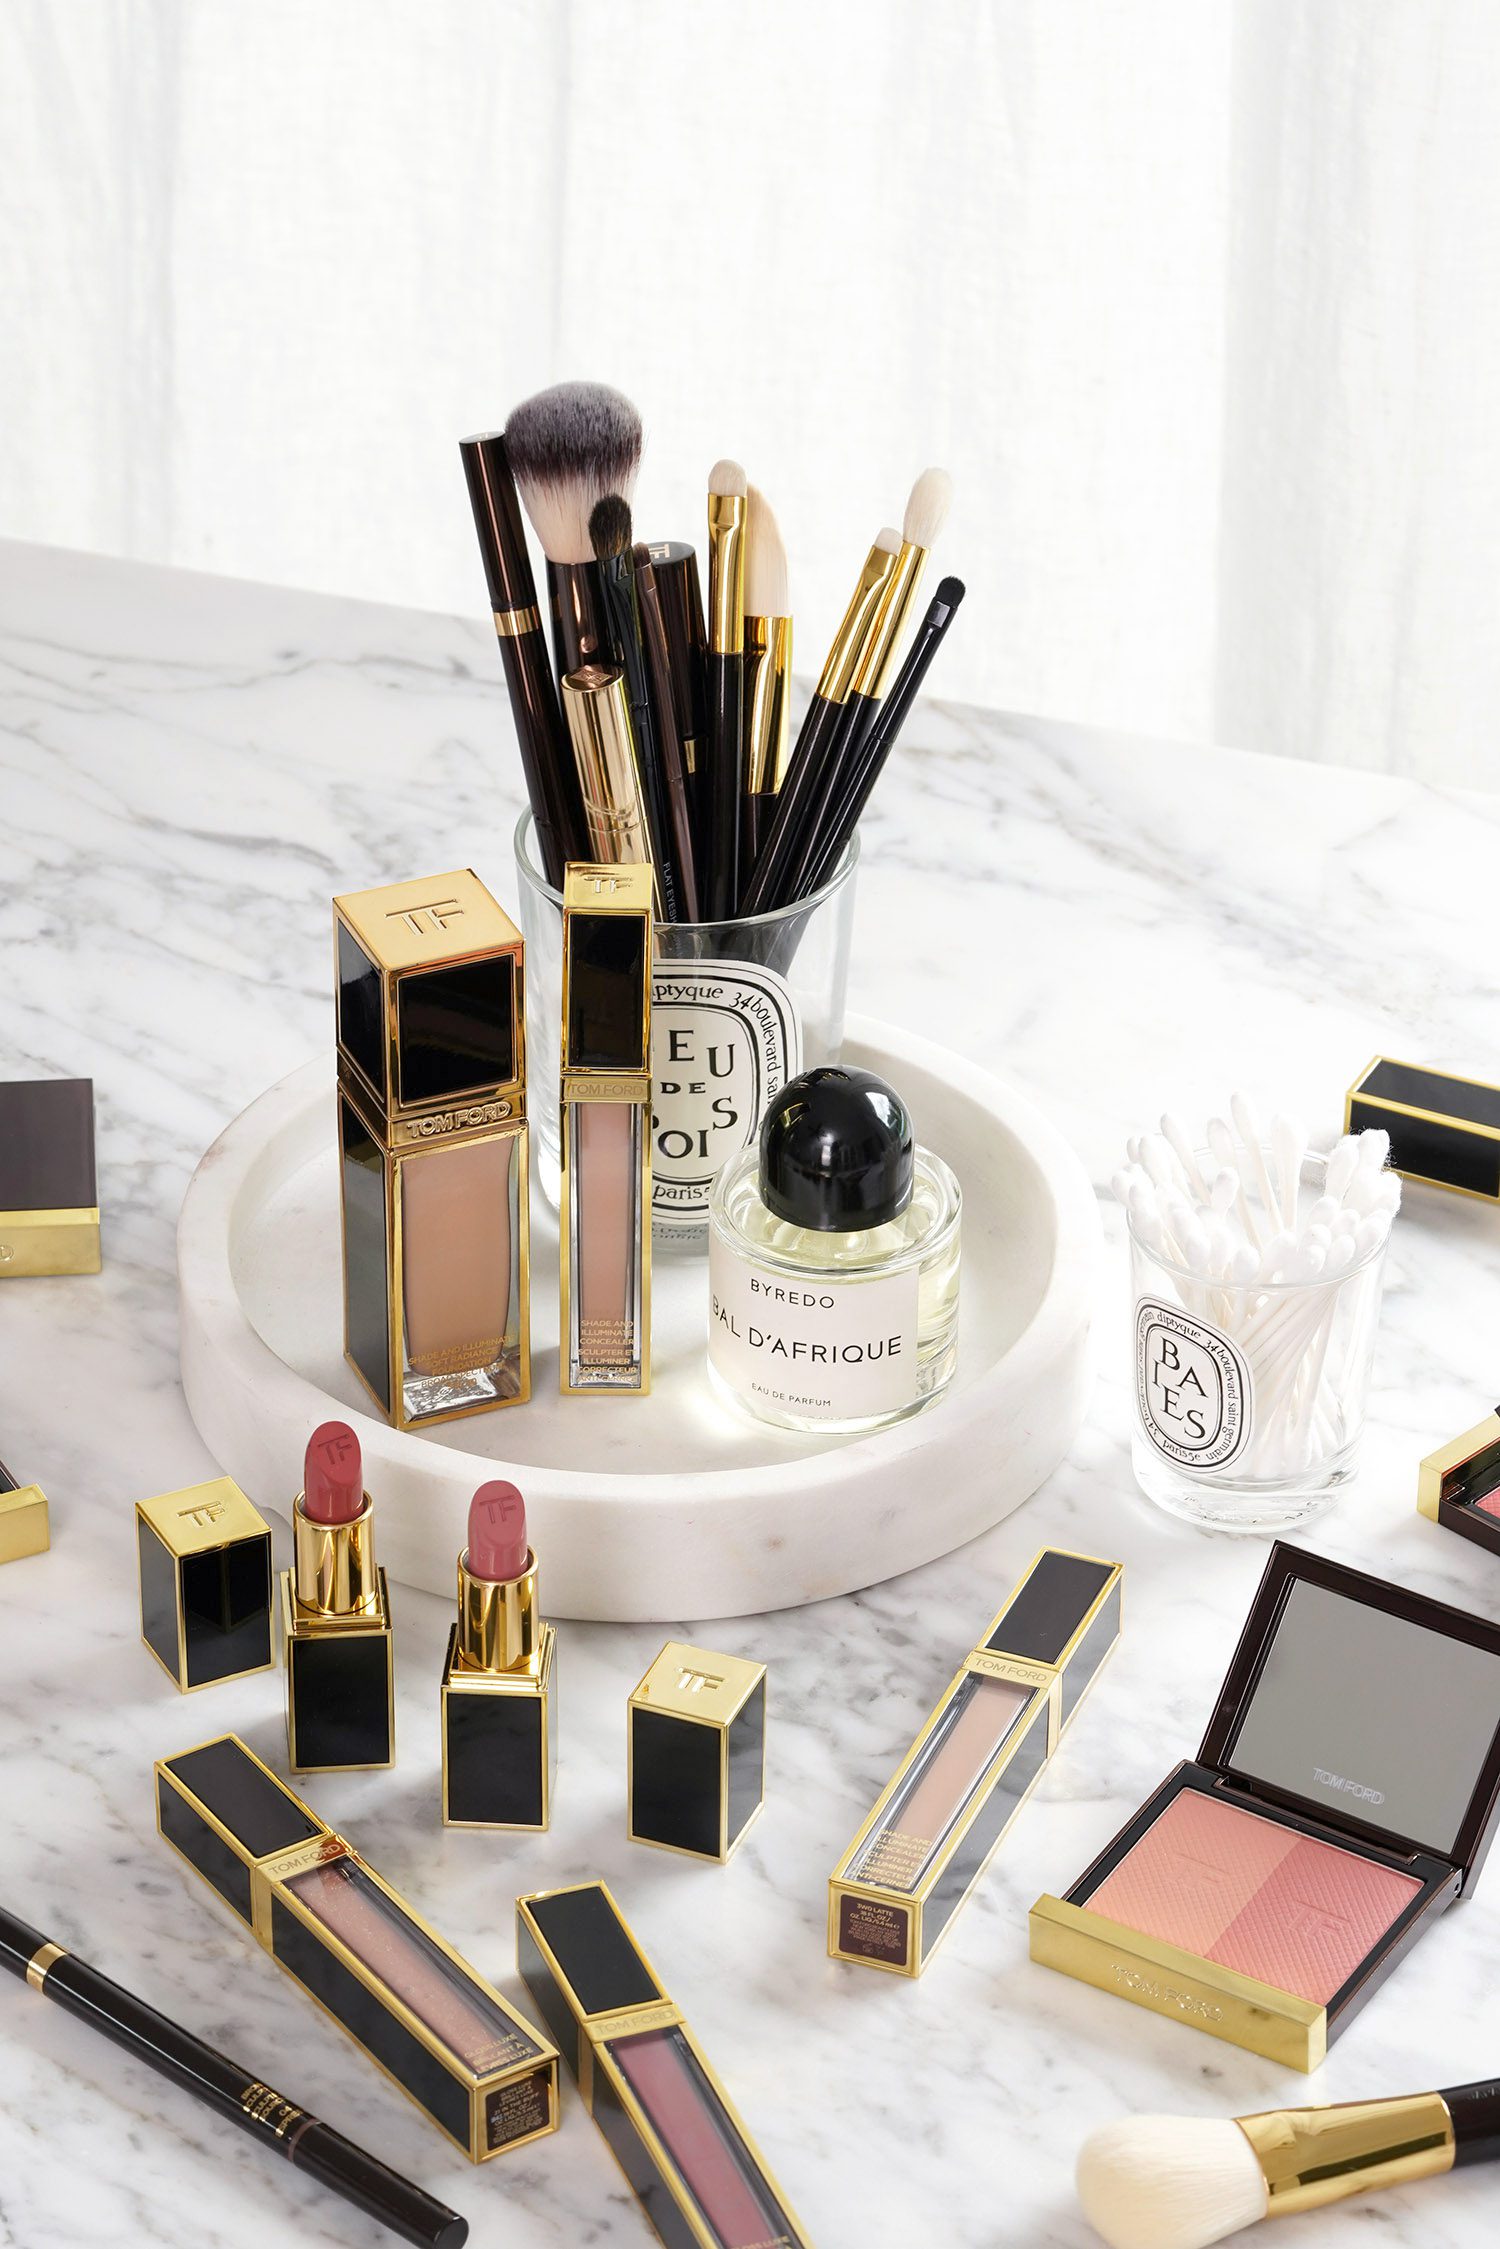 New Tom Ford Beauty Launches at Nordstrom - The Beauty Look Book